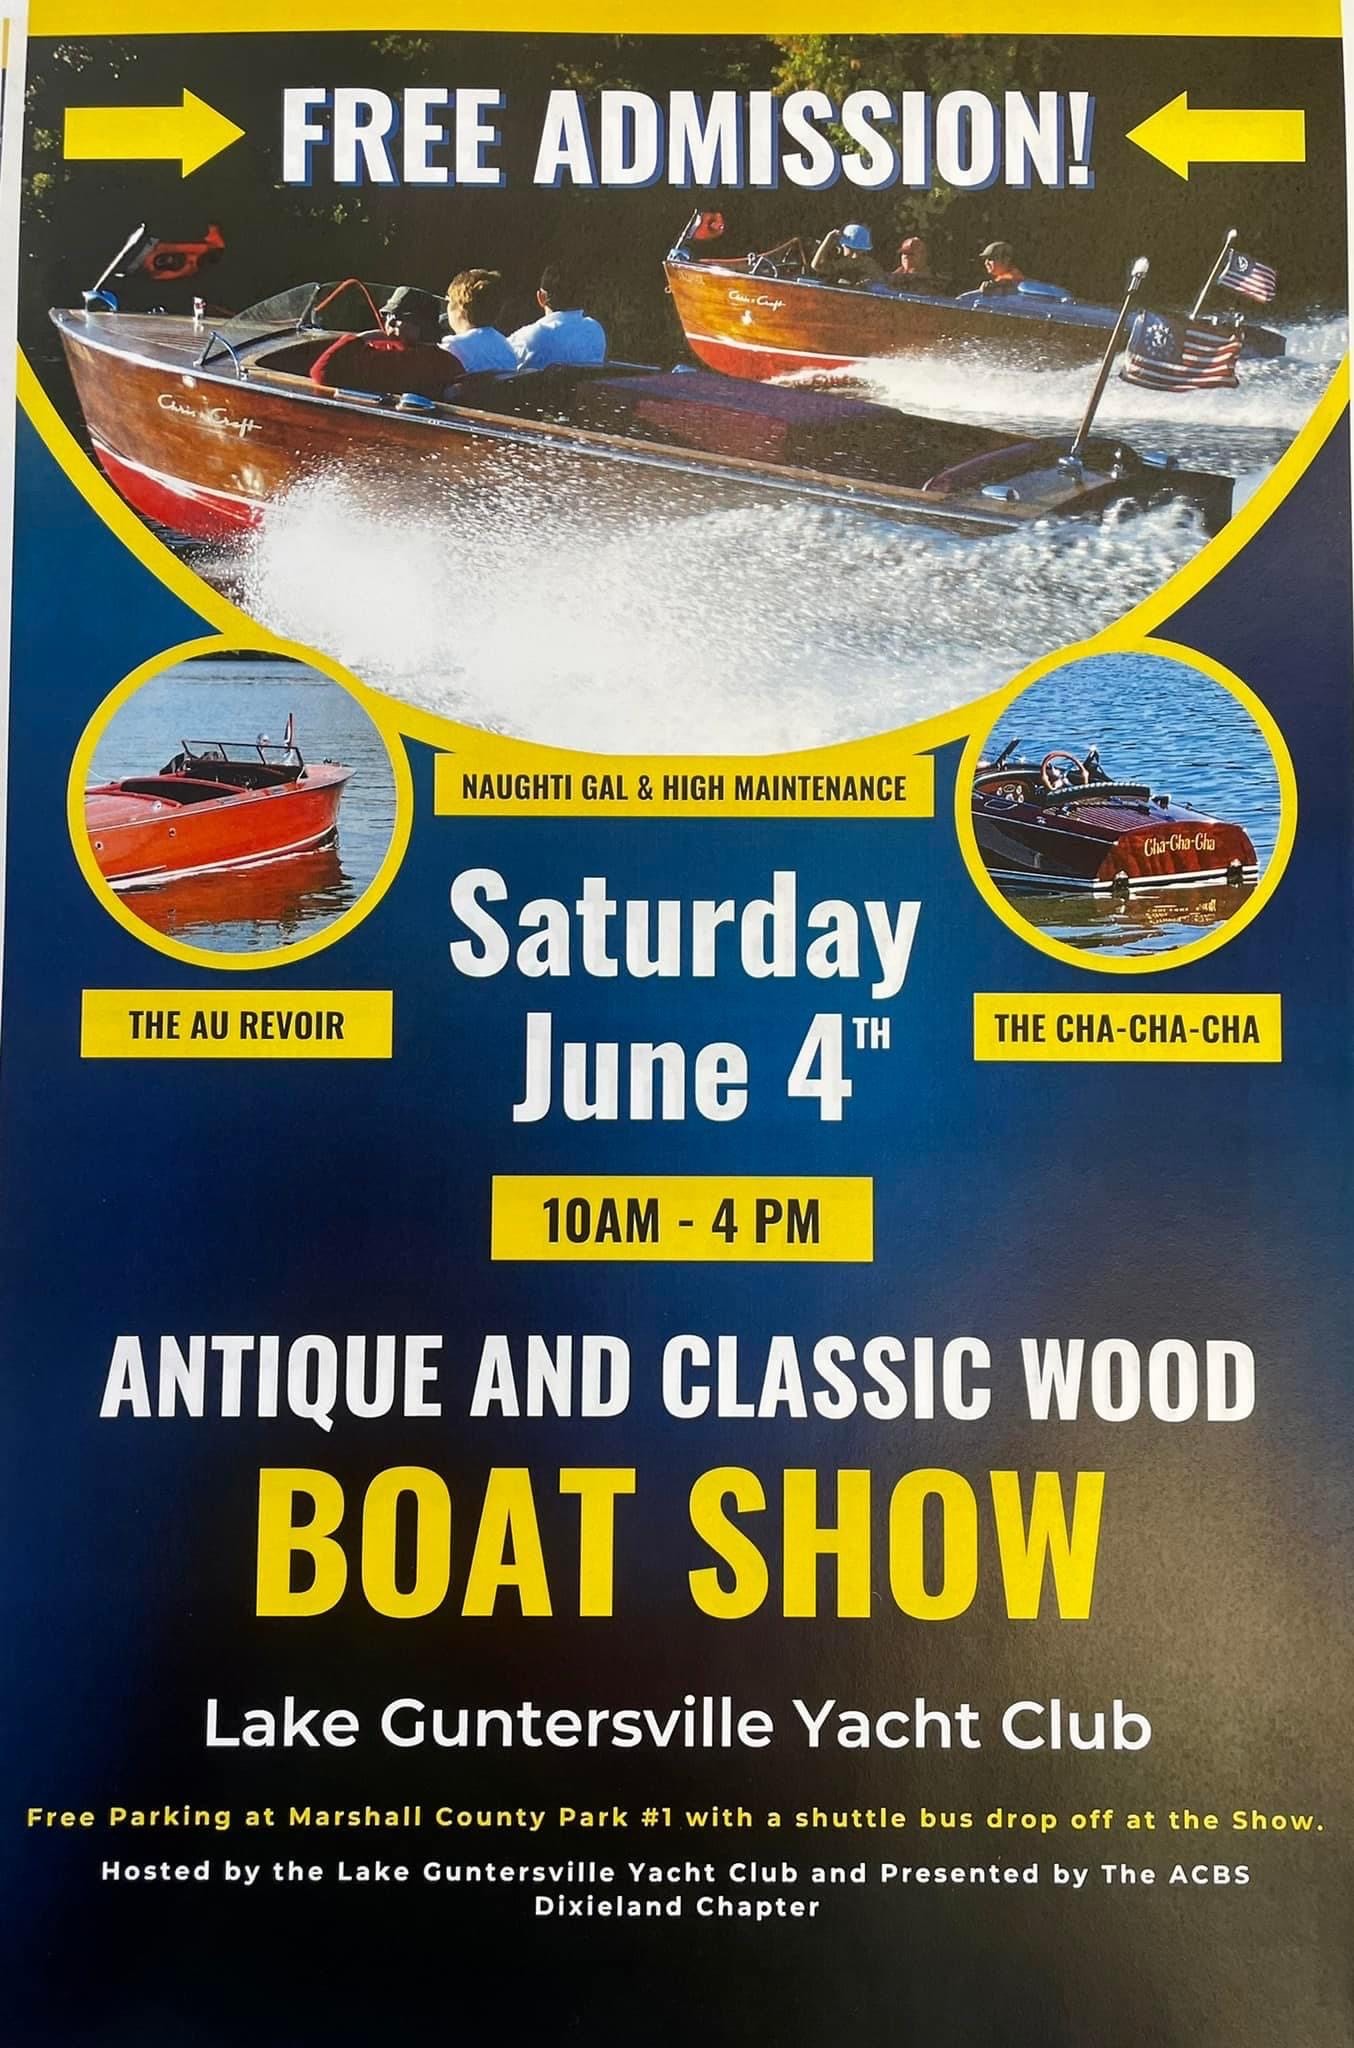 Antique & Classic Wood Boat Show, at Lake Guntersville Yacht Club